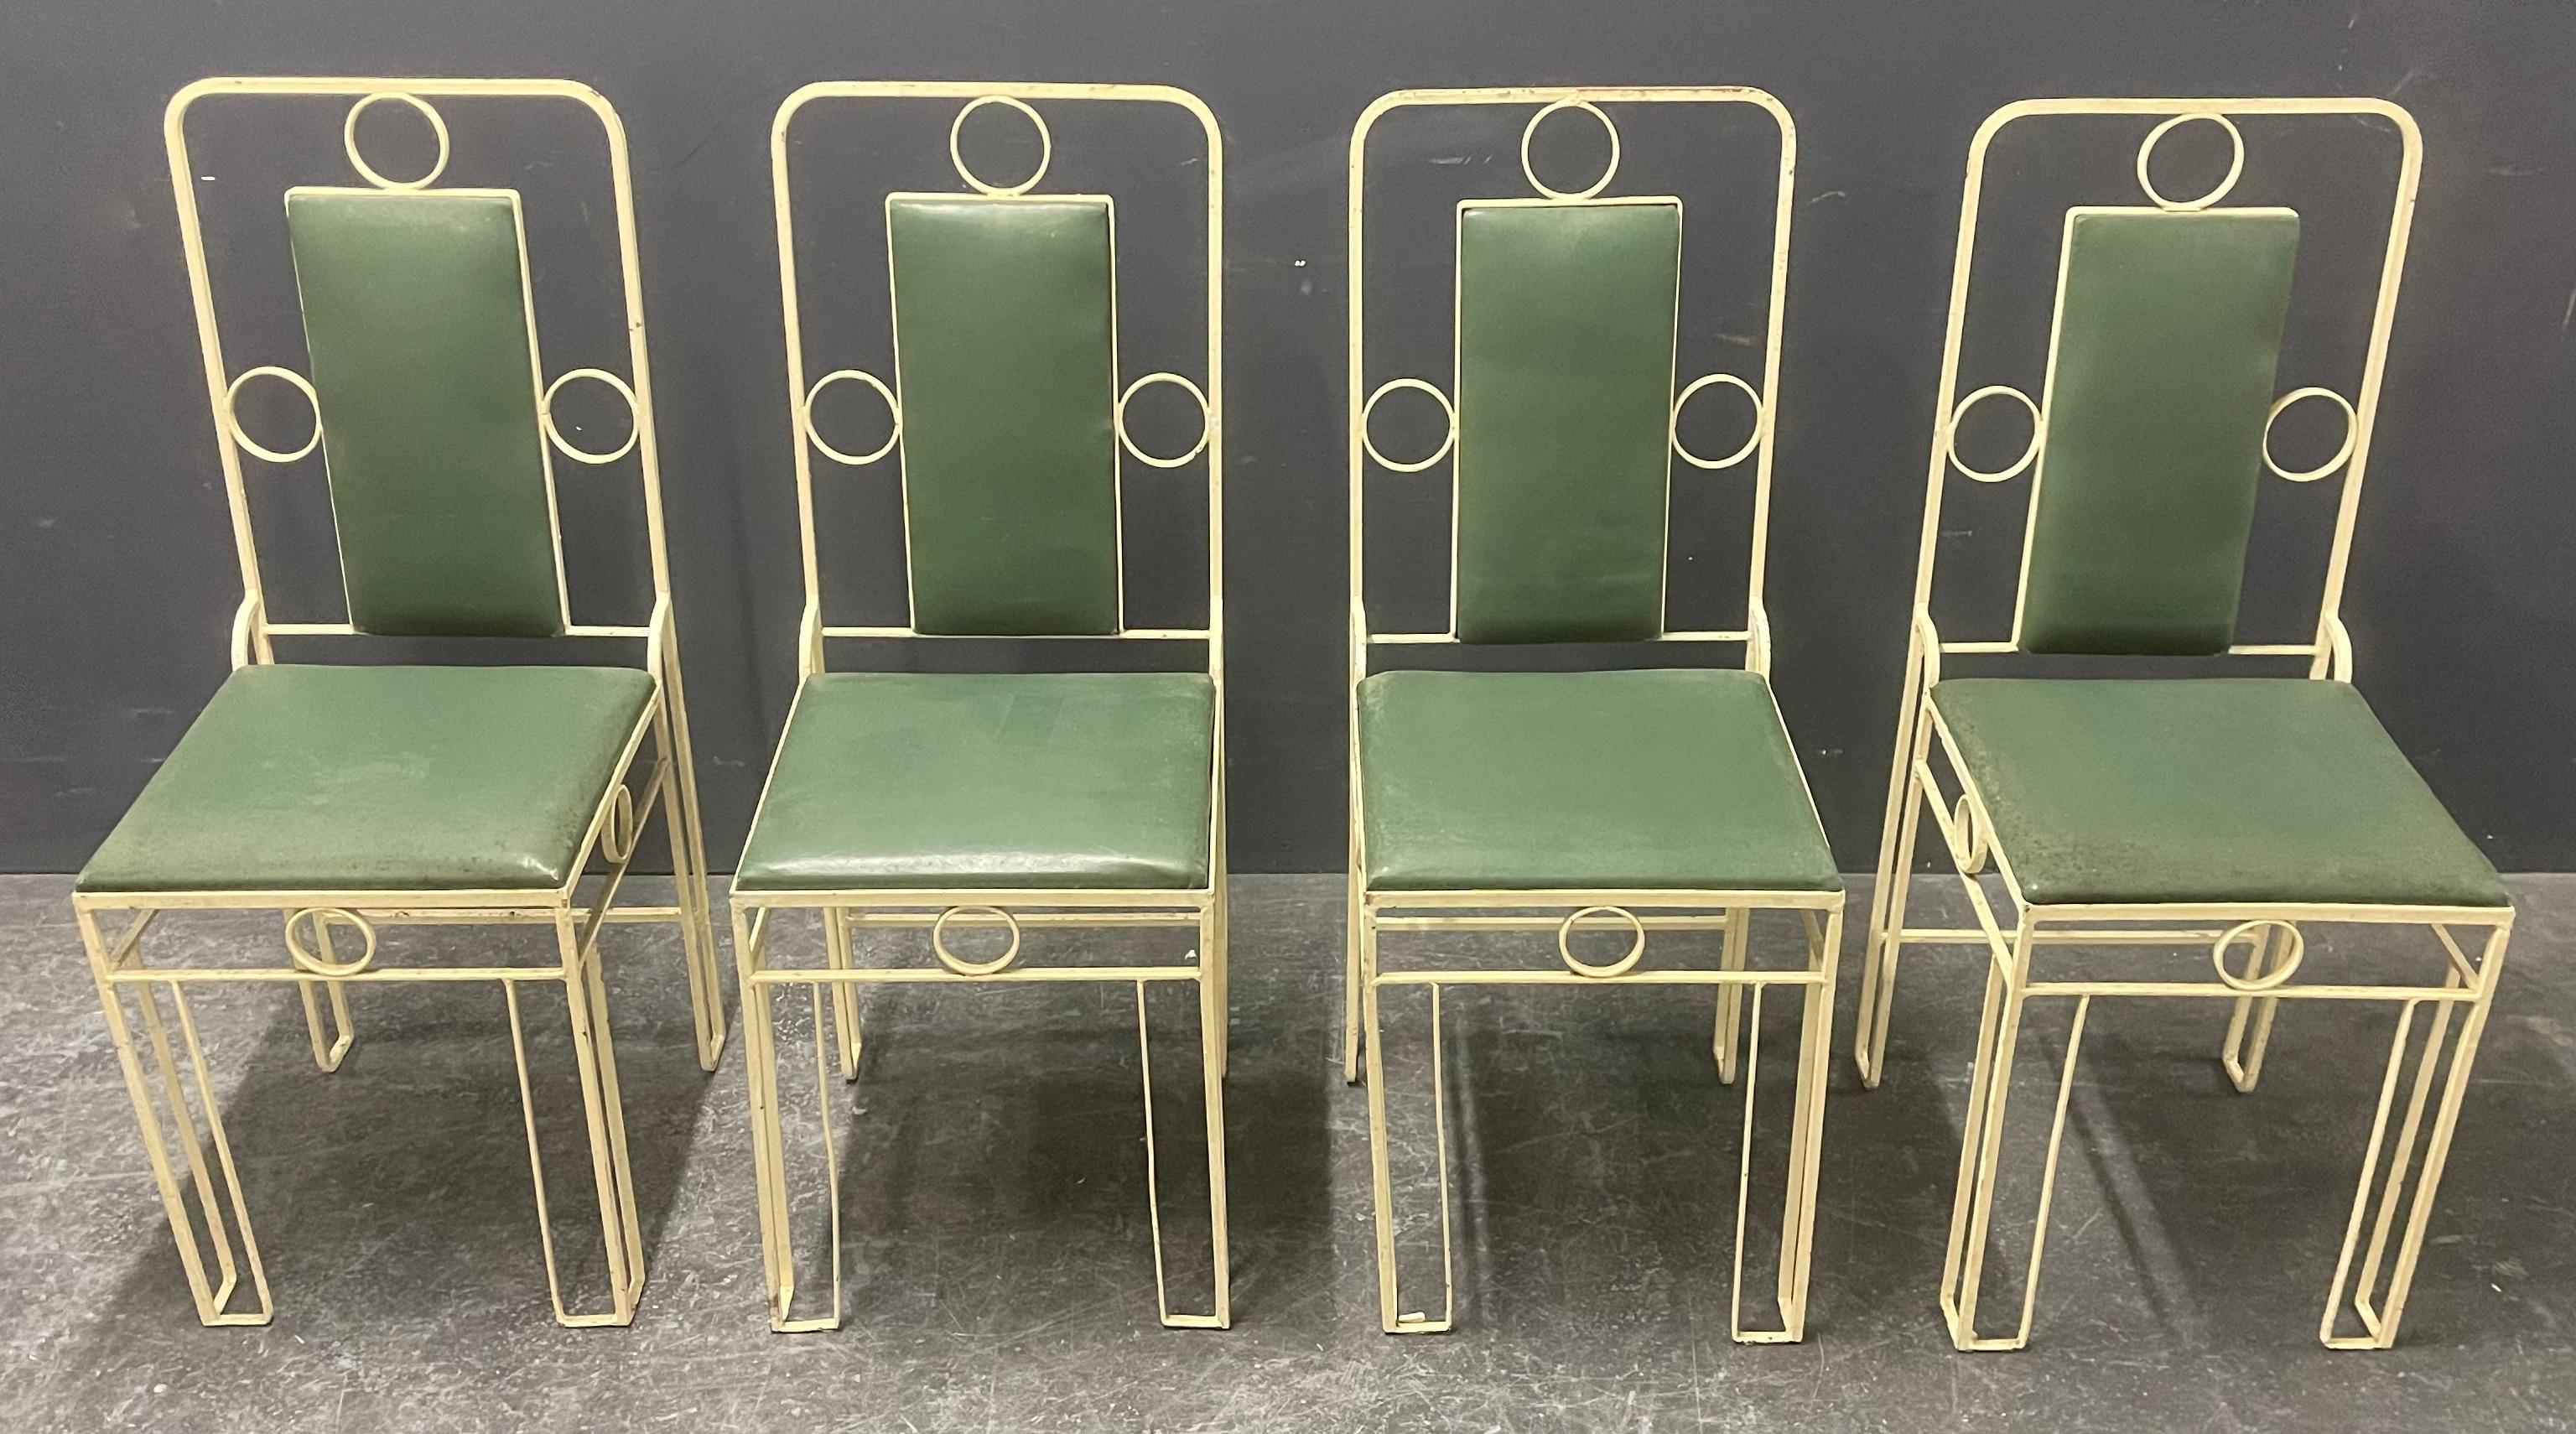 amazing patio or garden chairs from vienna. showing the clear lines of vienna secession.

i can ship in 2 boxes with dhl .